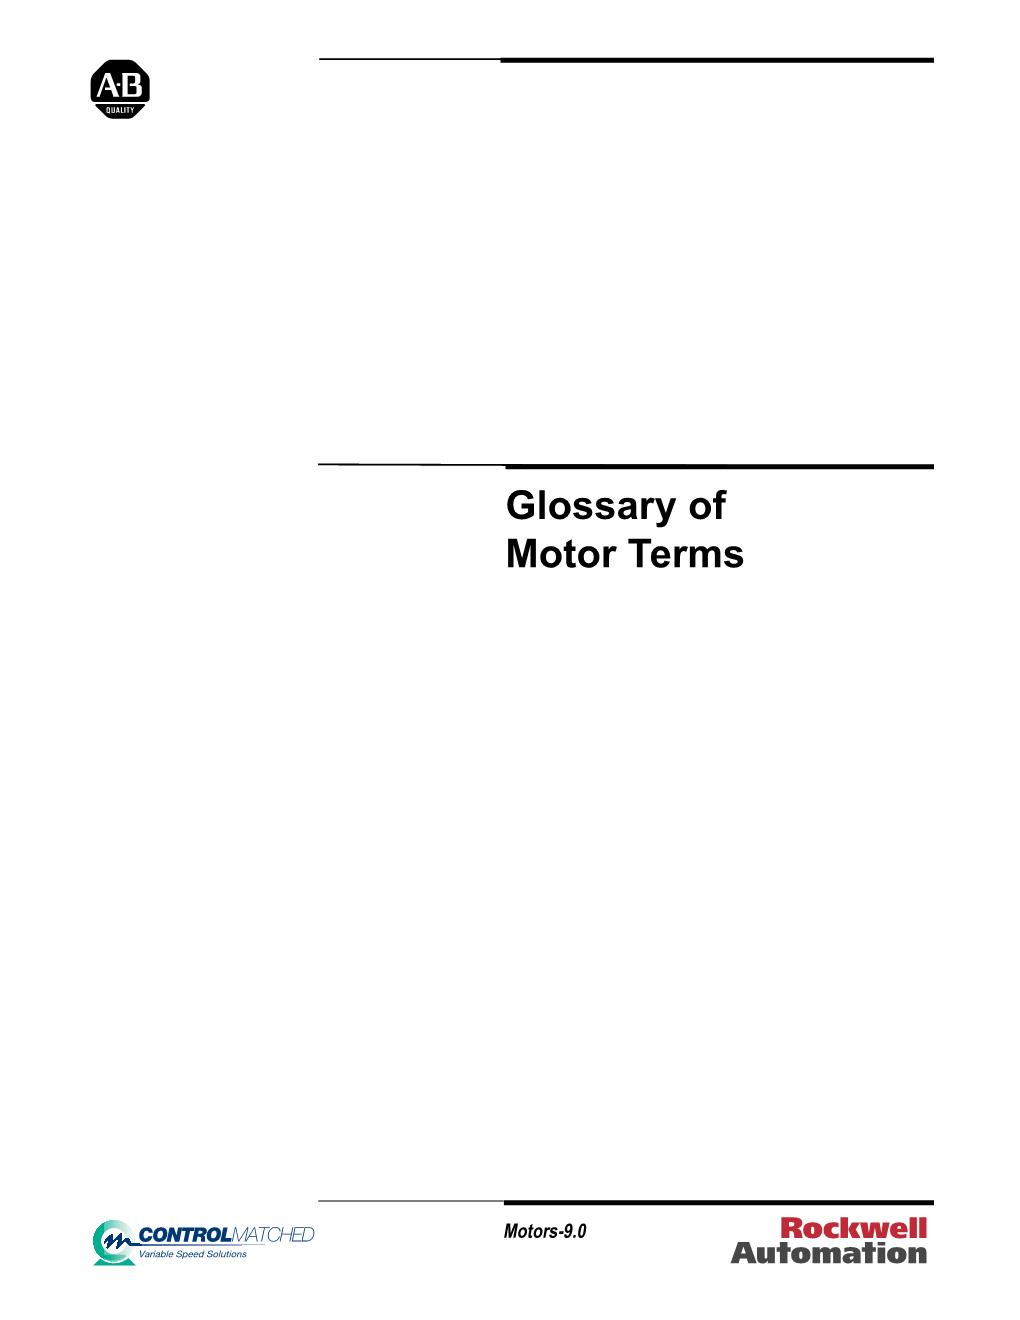 Glossary of Motor Terms